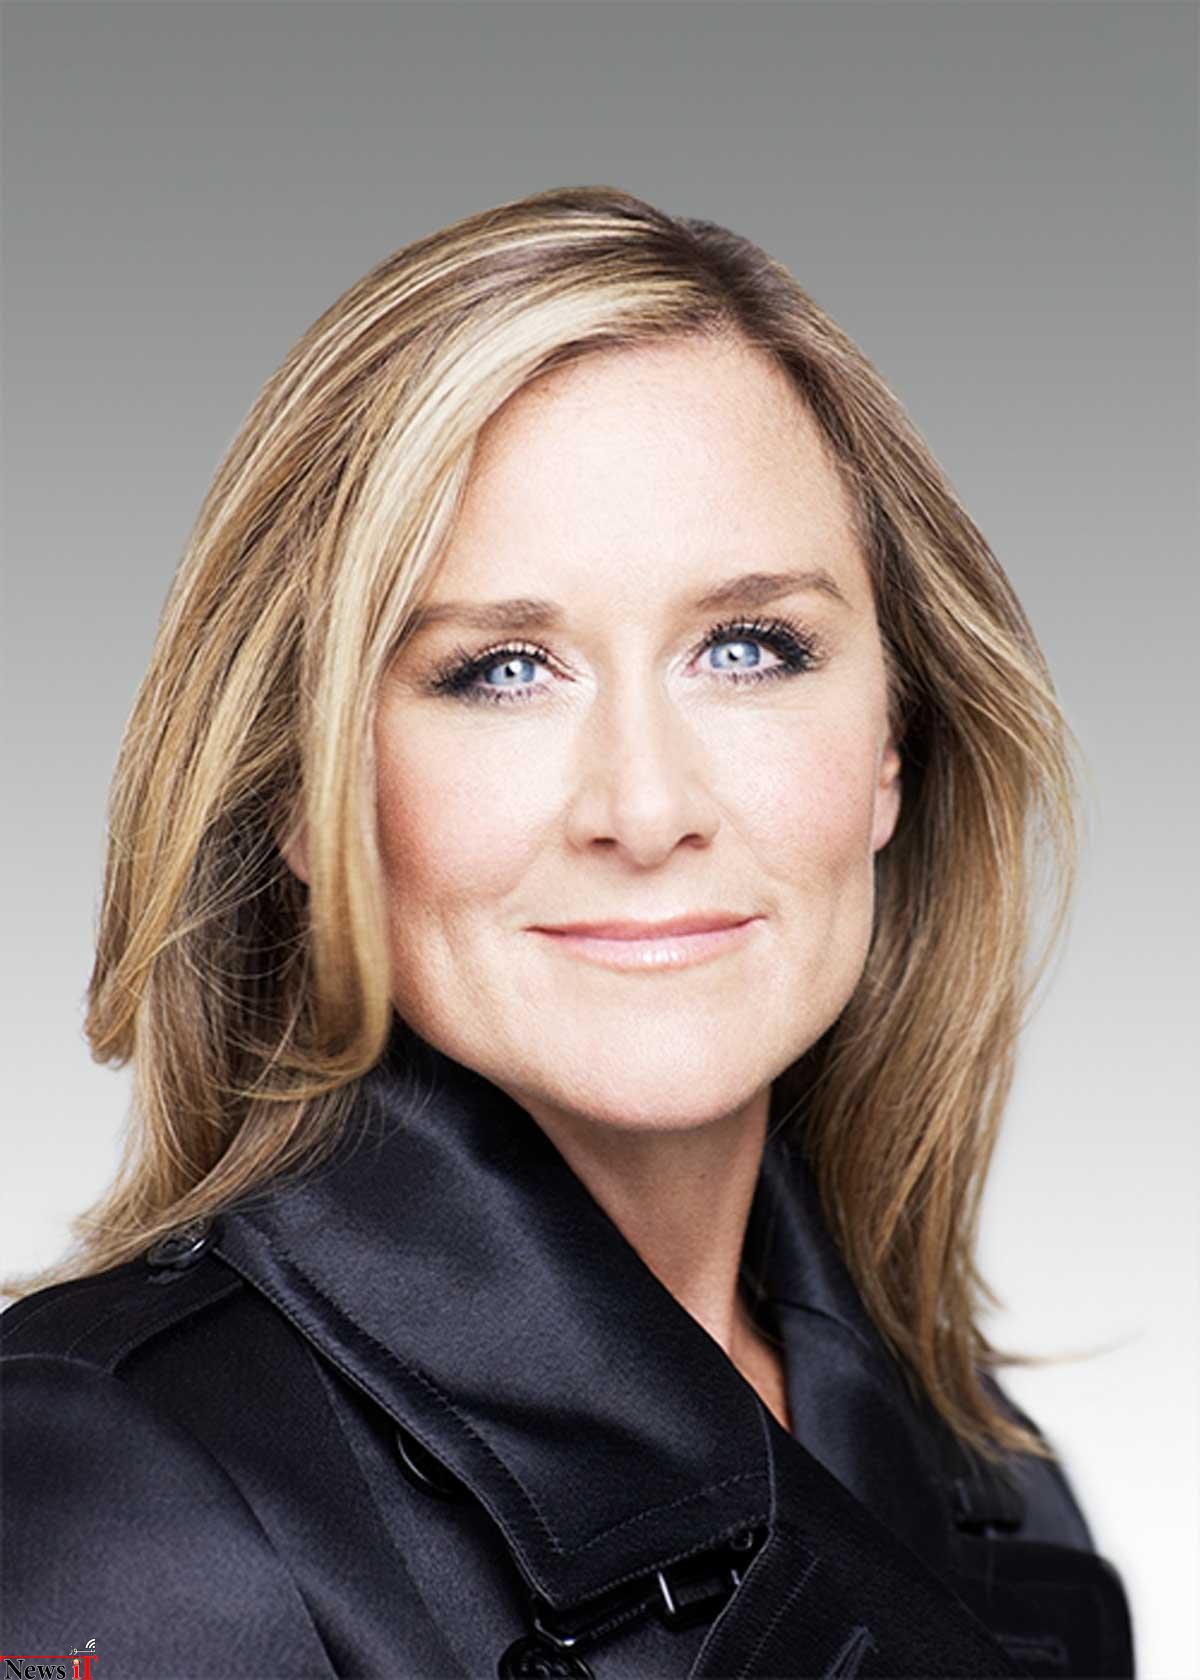 angela-ahrendts-oversees-how-apple-runs-its-retail-stores